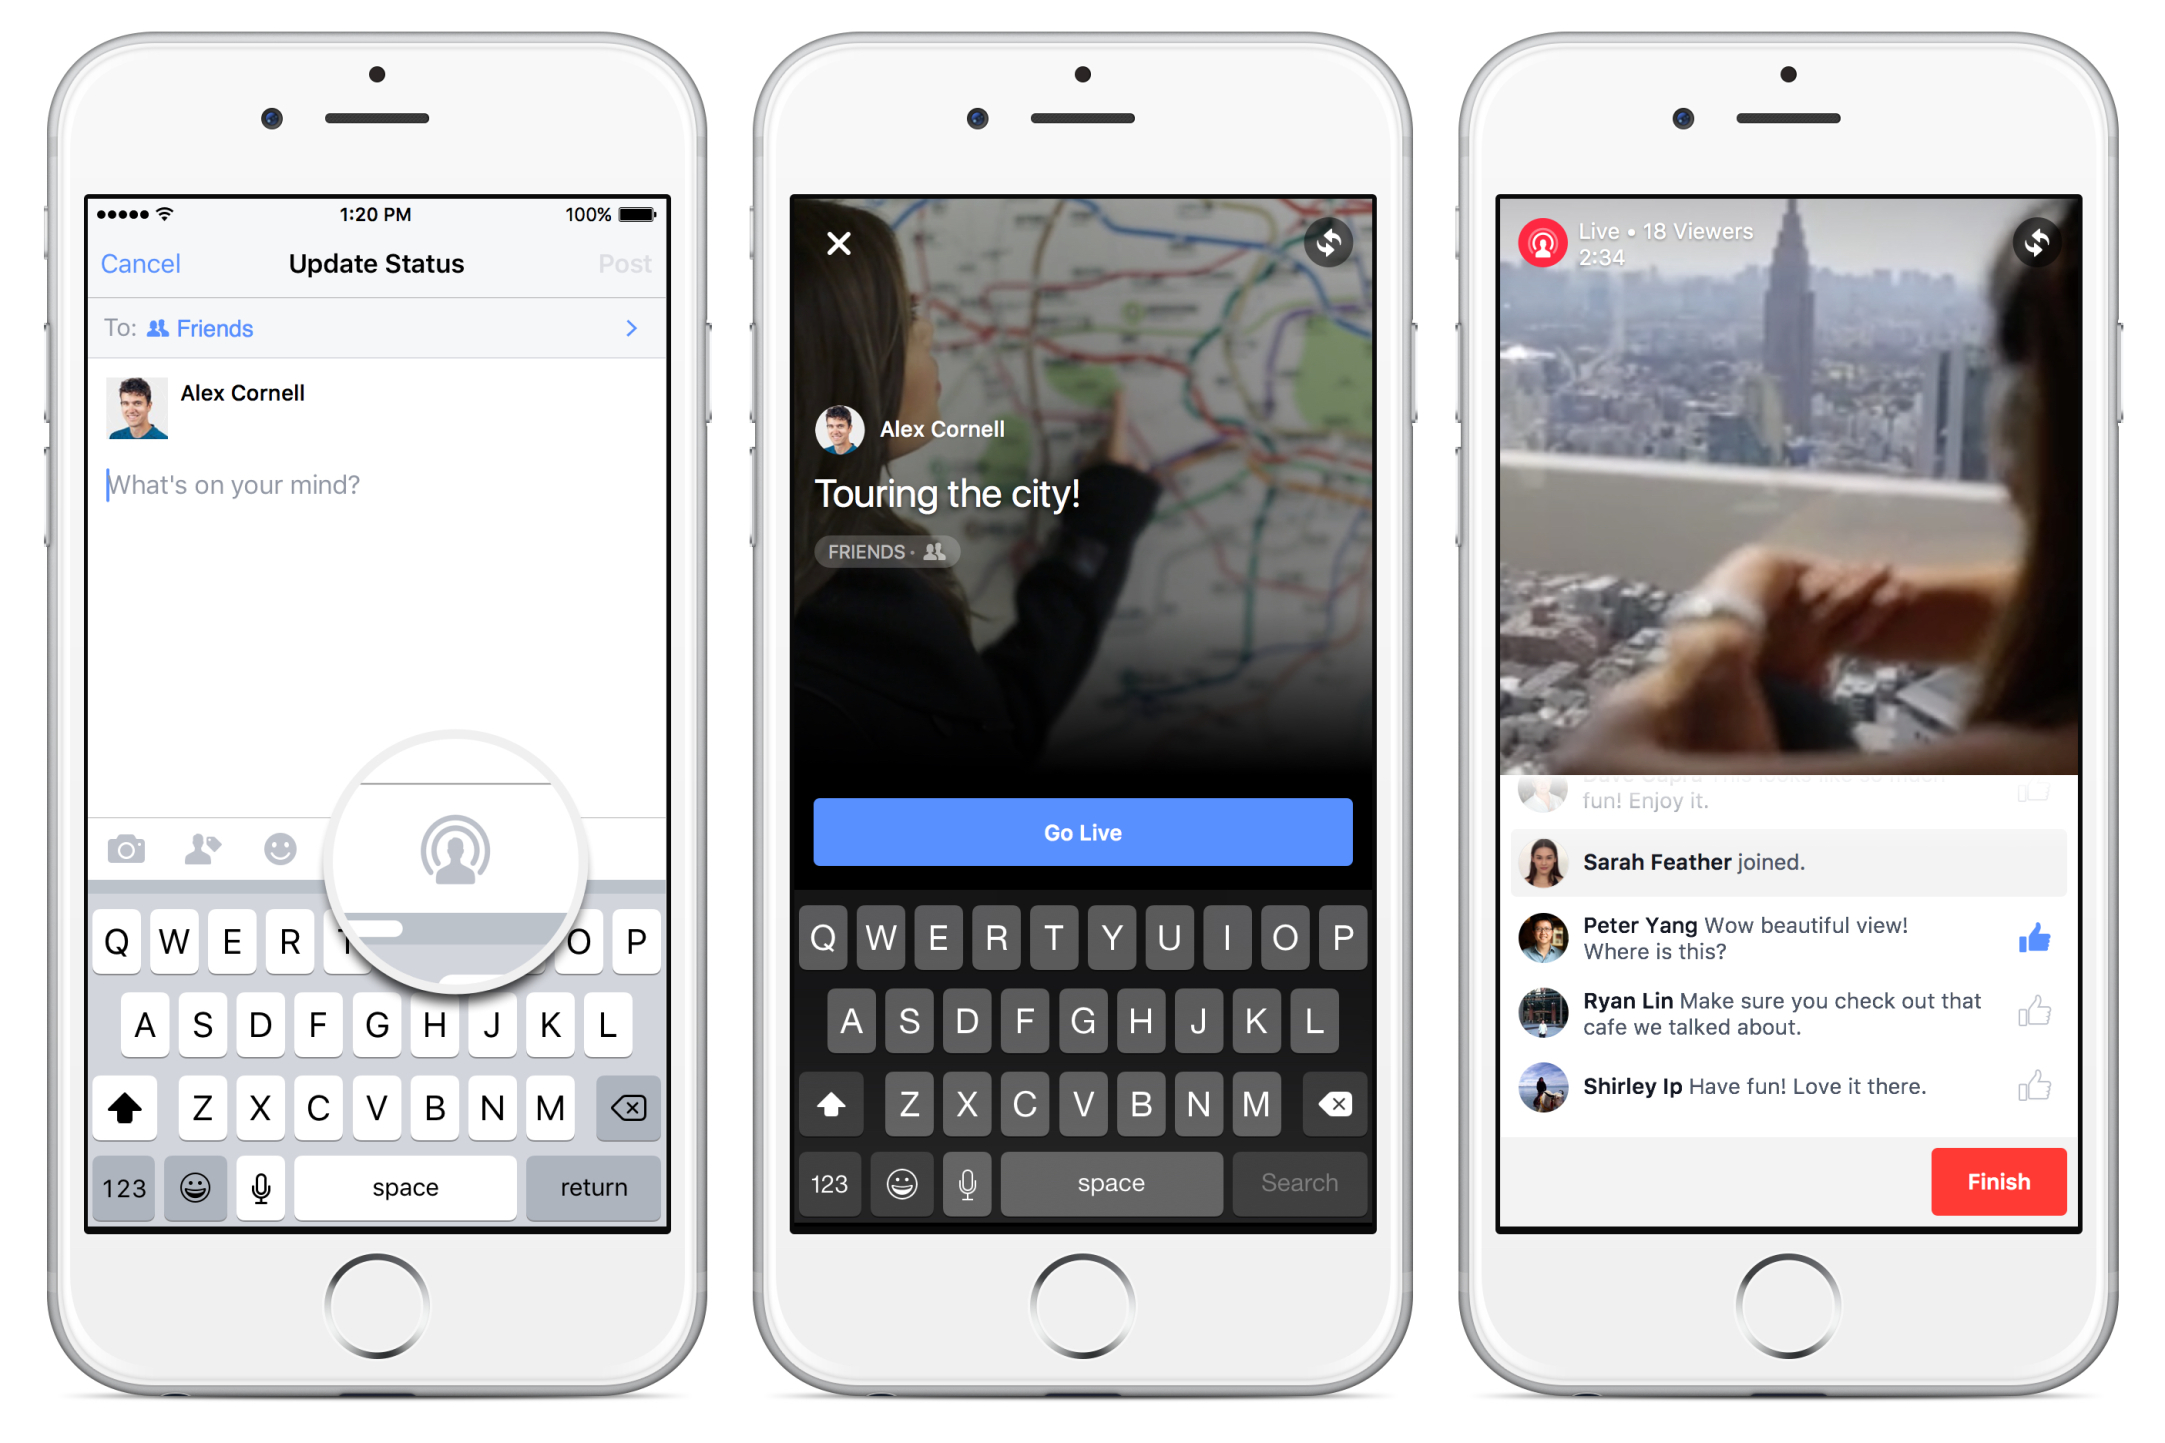 Facebook Live Video Streaming App For iPhone